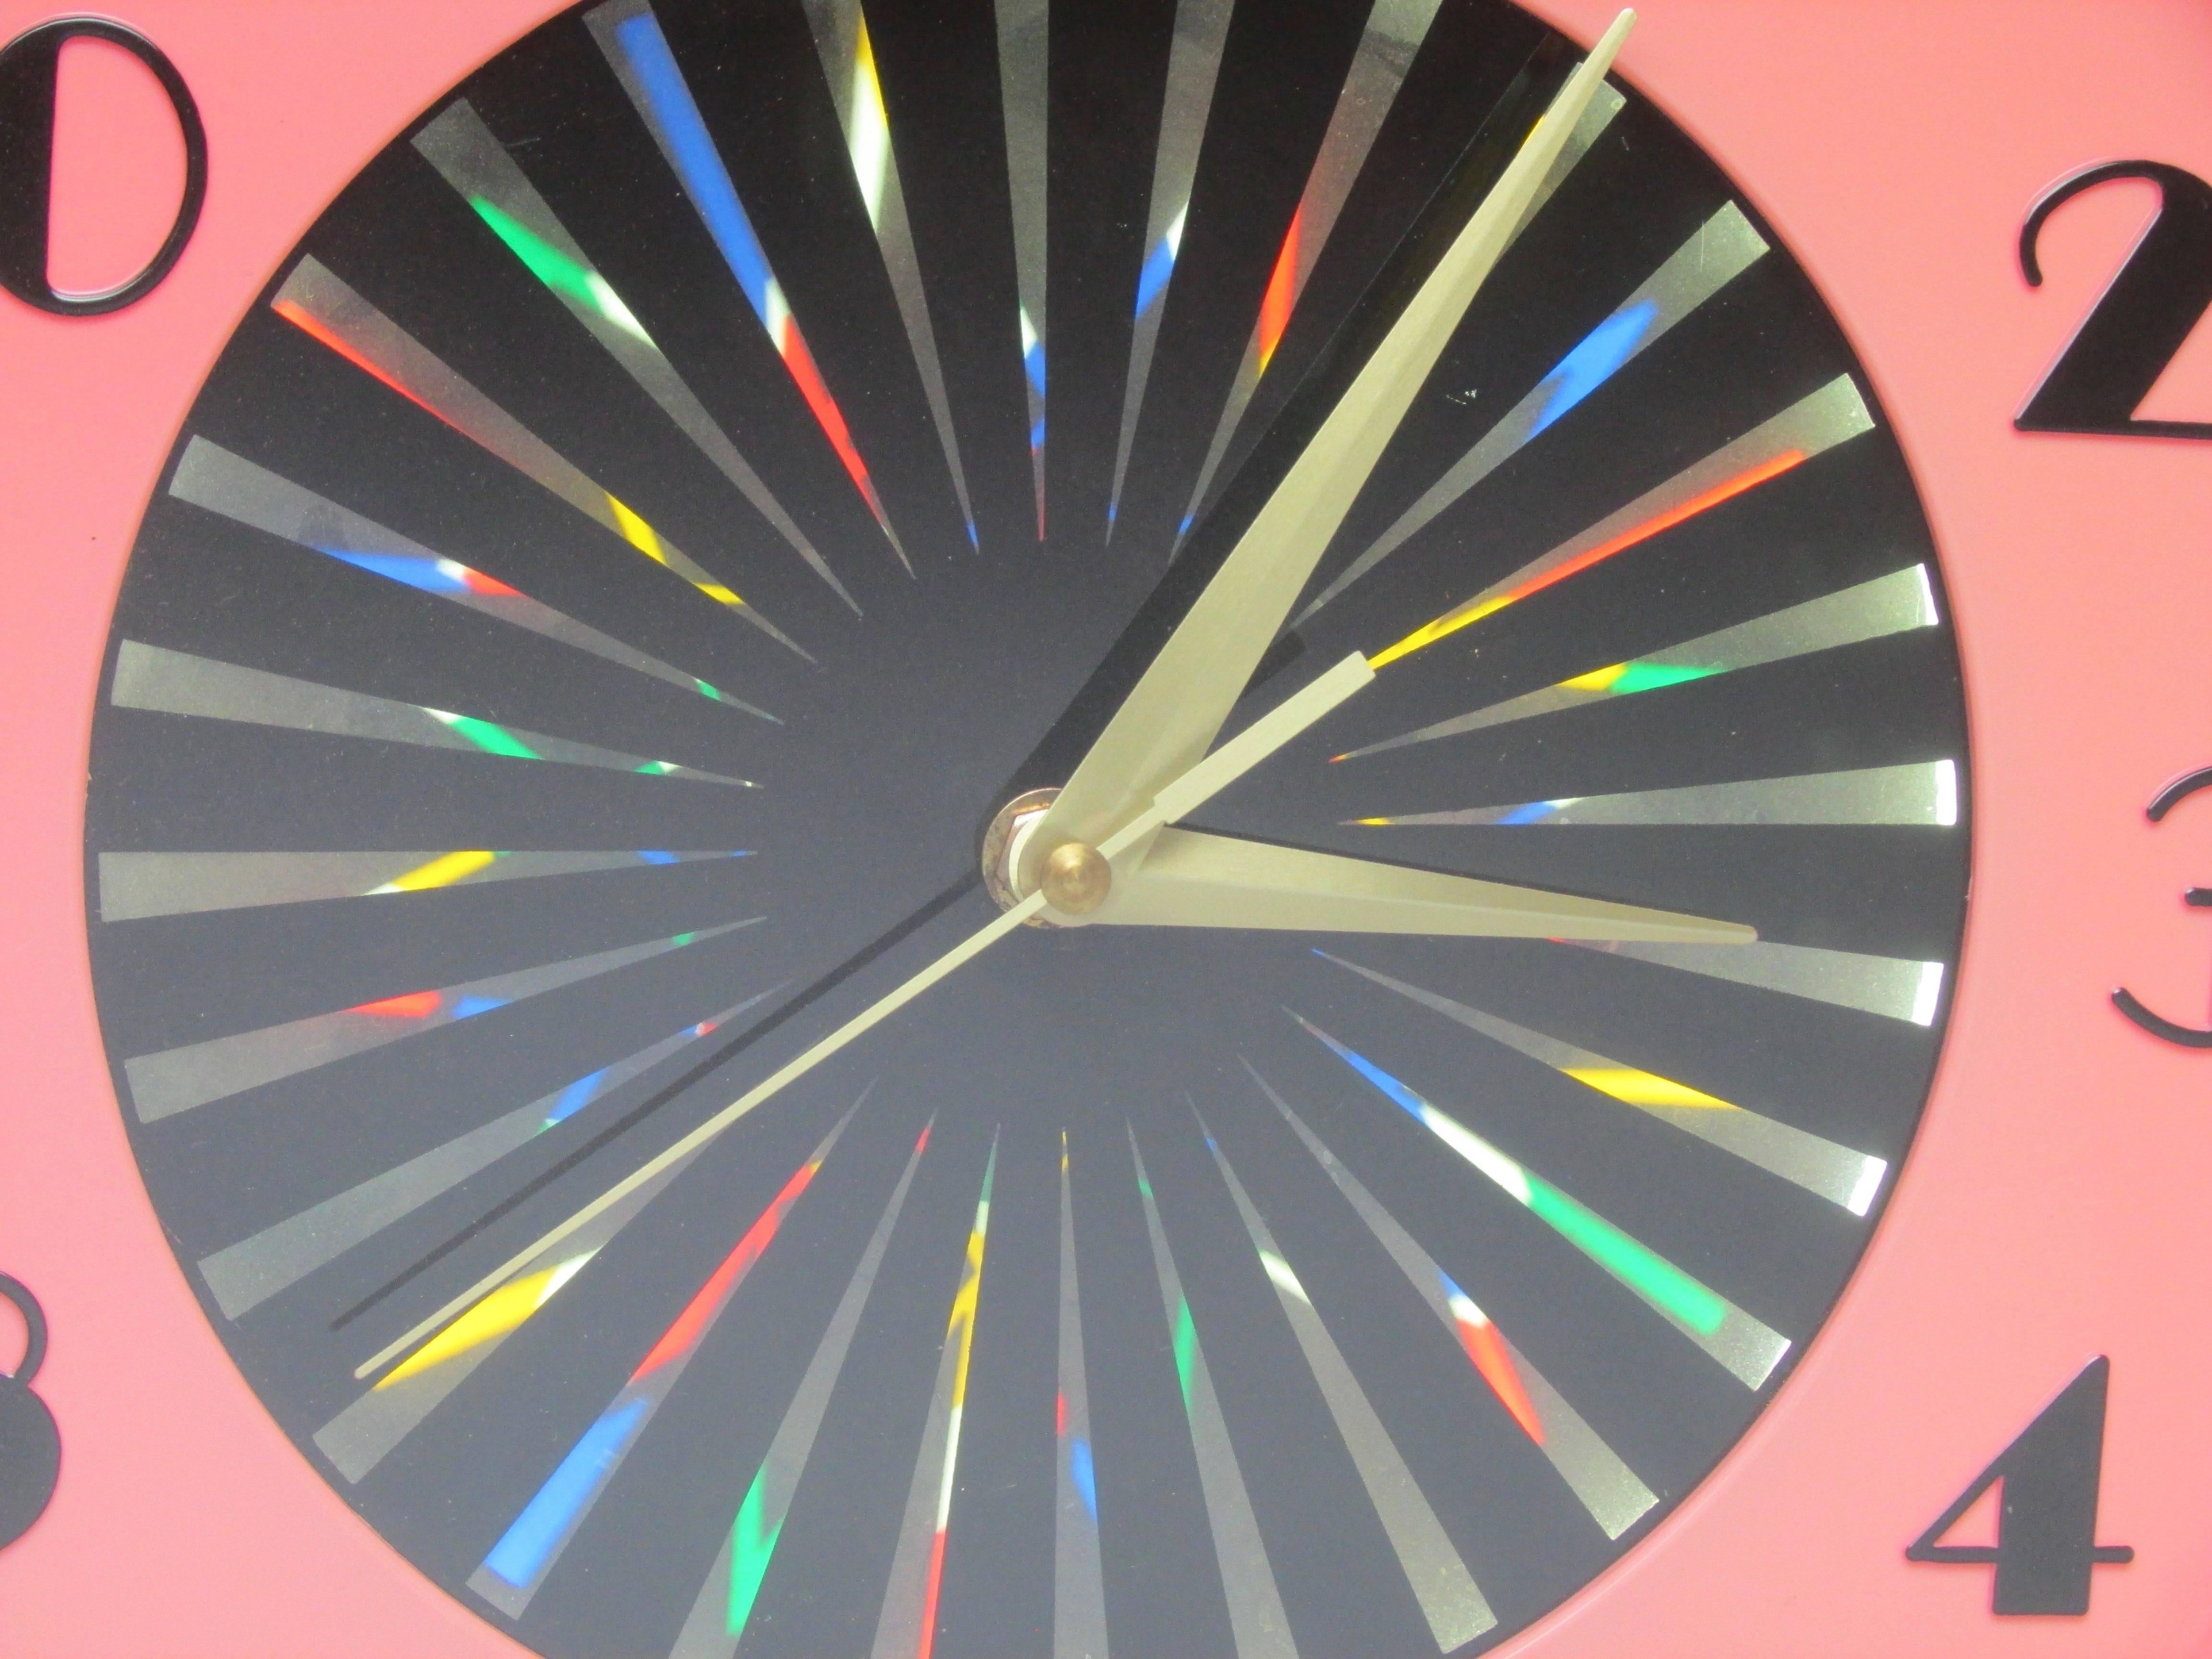 This is a fantastic retro kaleidoscope wall clock with a psychedelic spinning color wheel in the center, circa 1950.